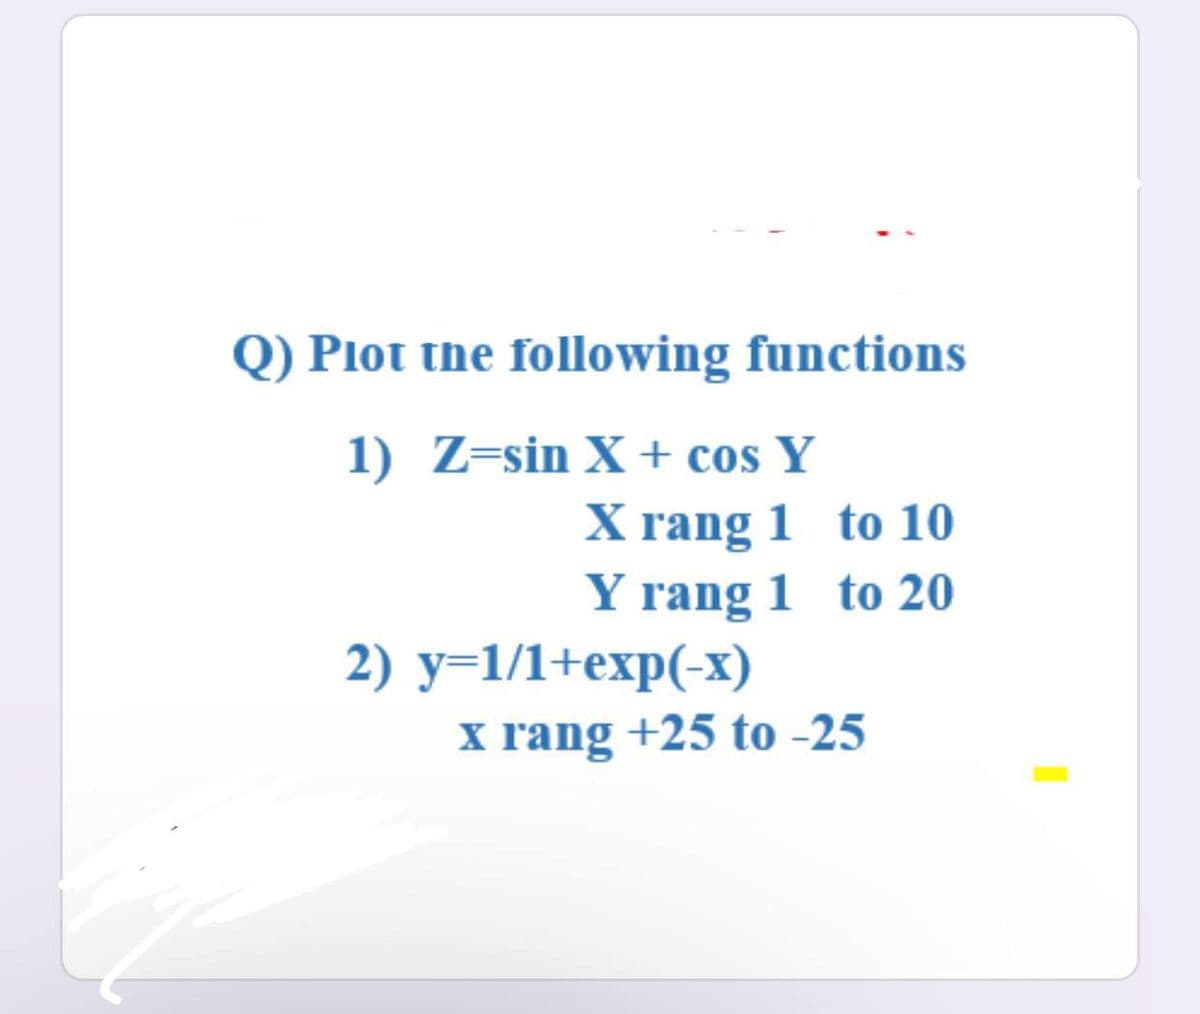 Q) Plot the following functions
1) Z=sin X + cos Y
X rang 1 to 10
Y rang 1 to 20
2) y=1/1+exp(-x)
x rang +25 to-25